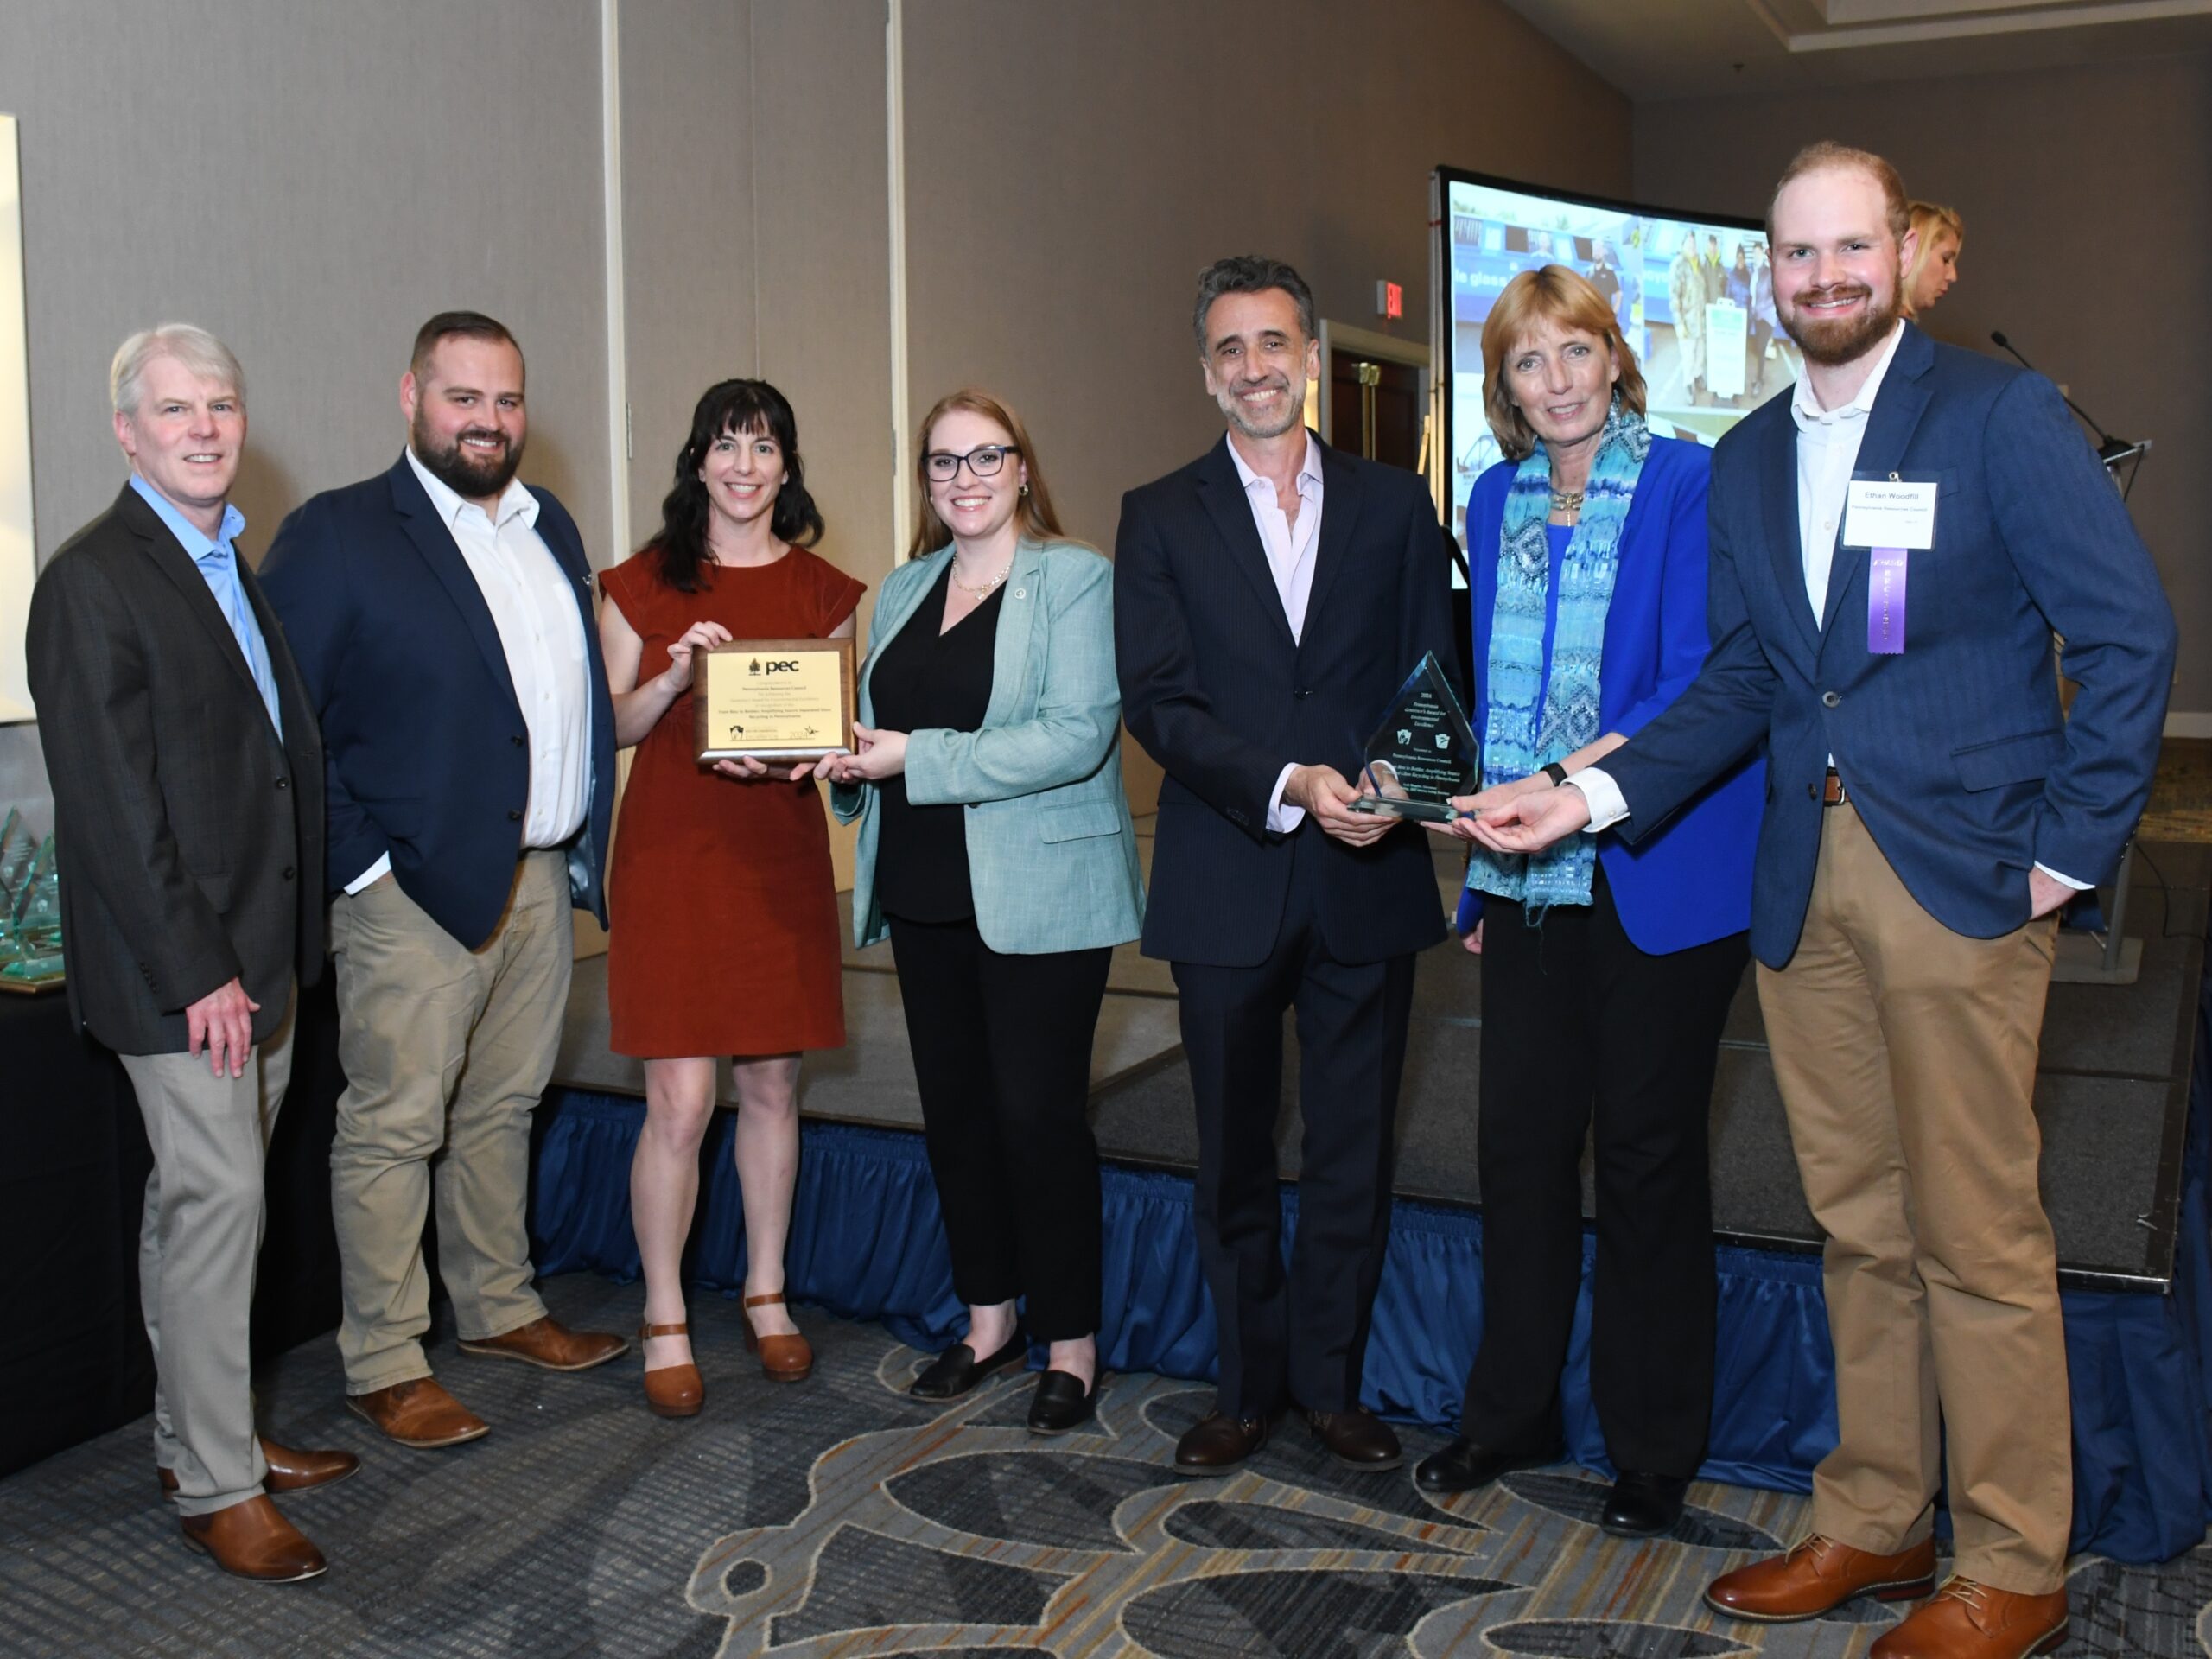 PRC glass recycling program earns Governor’s Award for Environmental Excellence